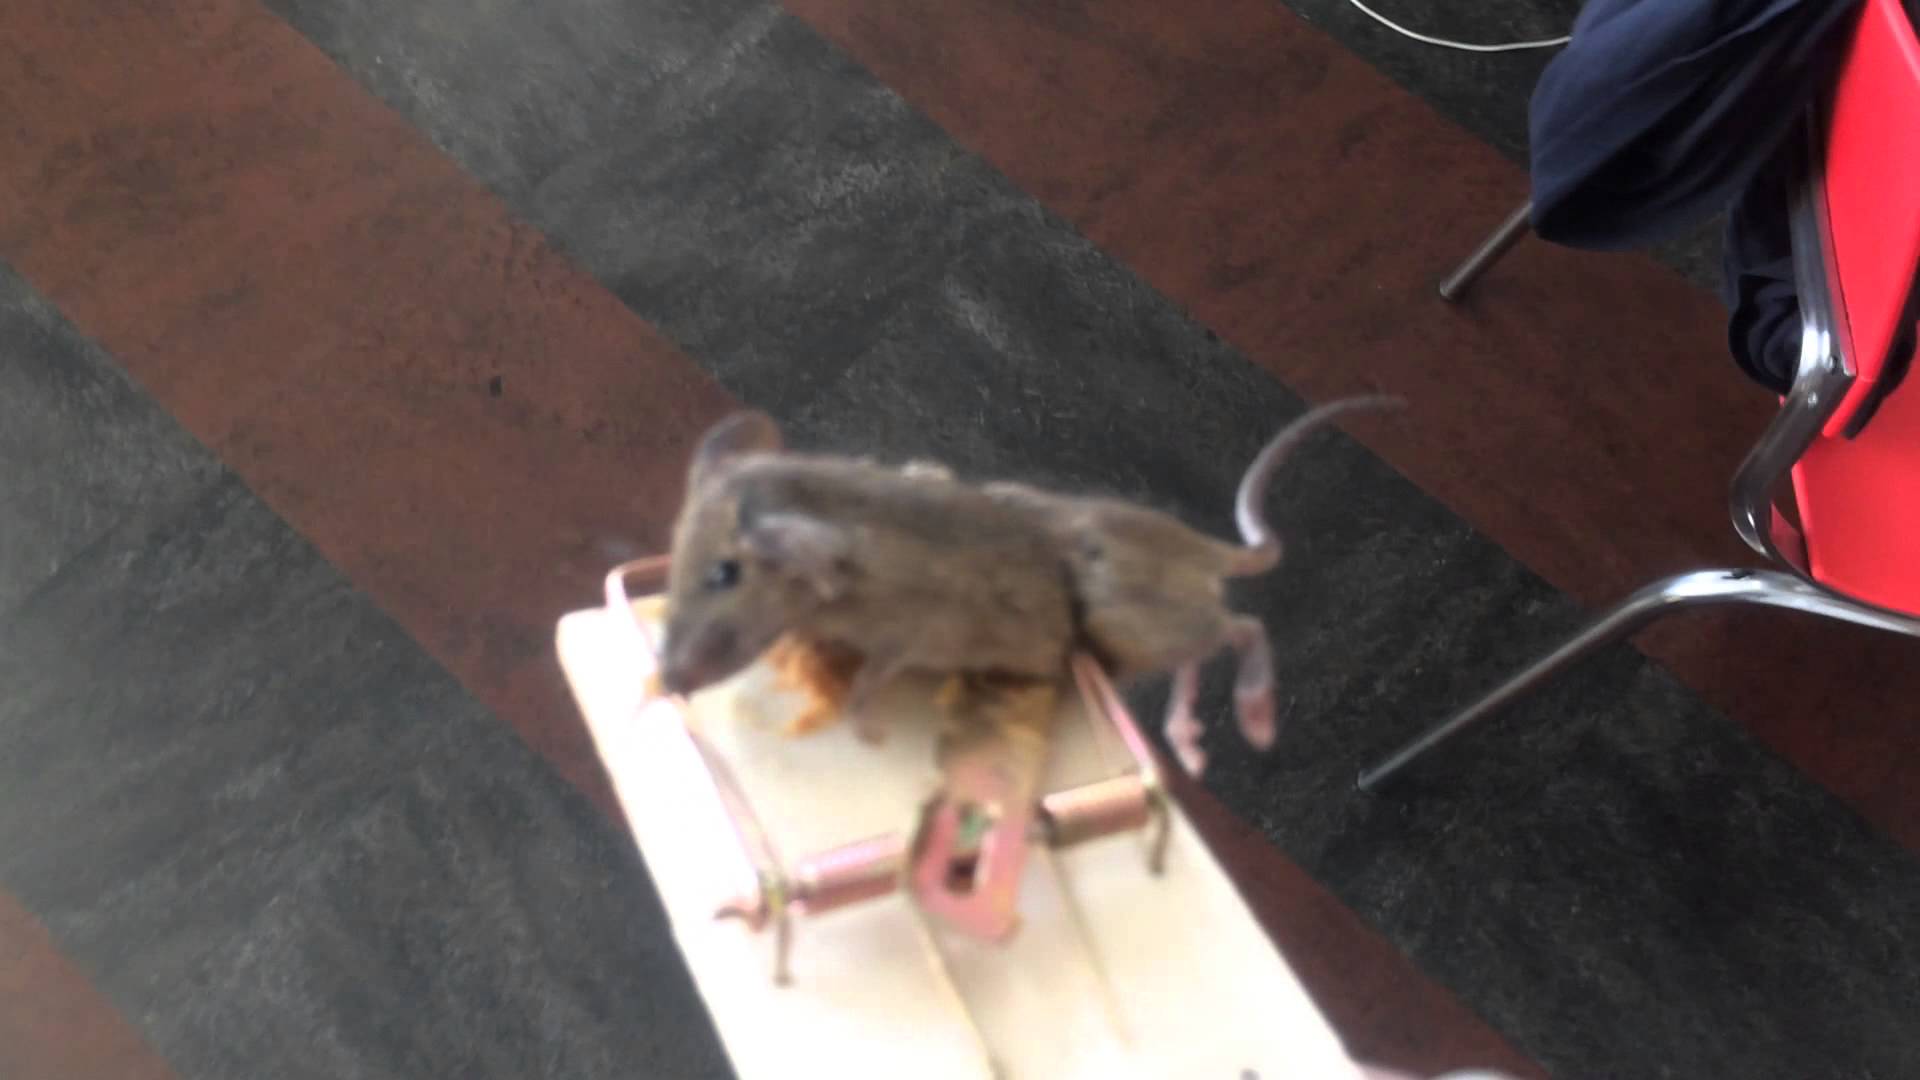 MOUSE CAUGHT IN CLOSET